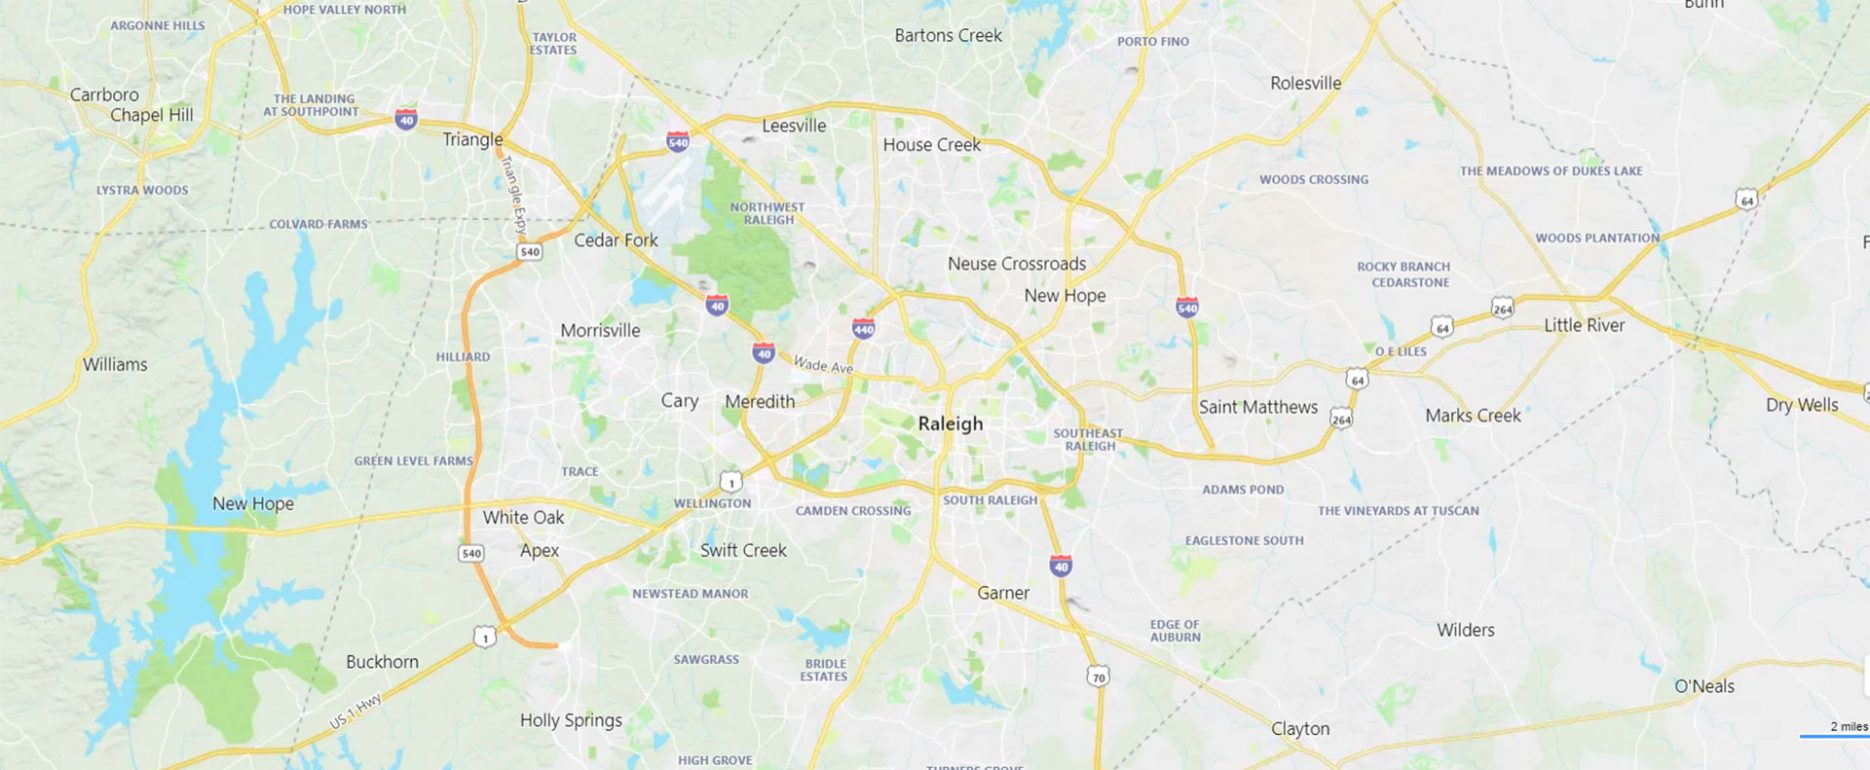 Raleigh Maps 1920 1870x770 